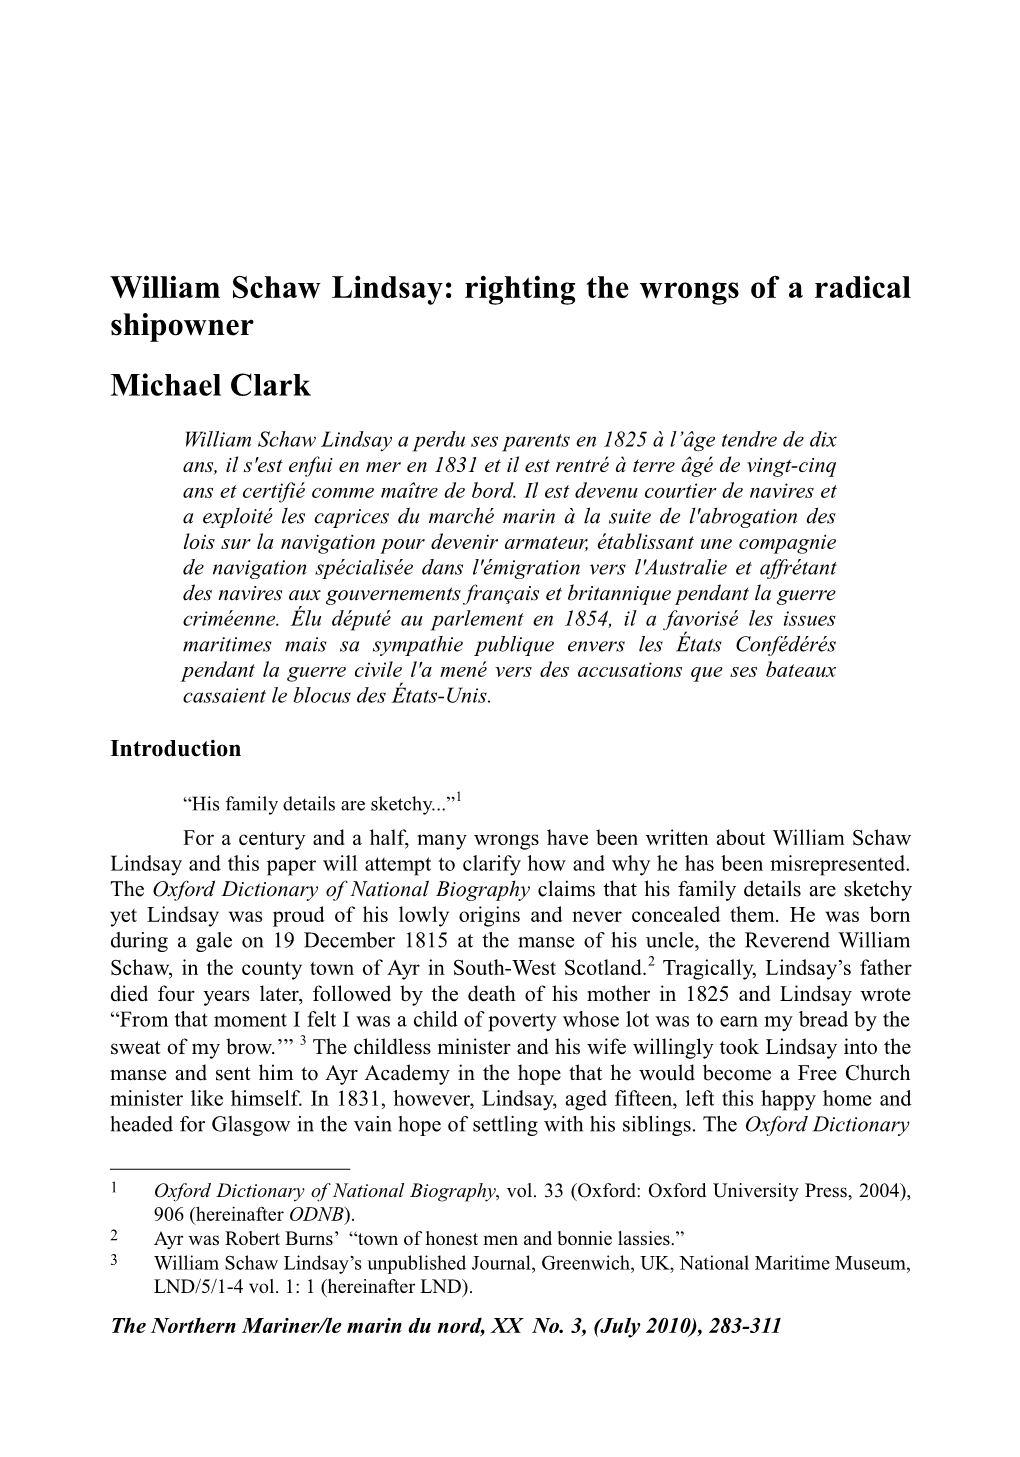 William Schaw Lindsay: Righting the Wrongs of a Radical Shipowner Michael Clark